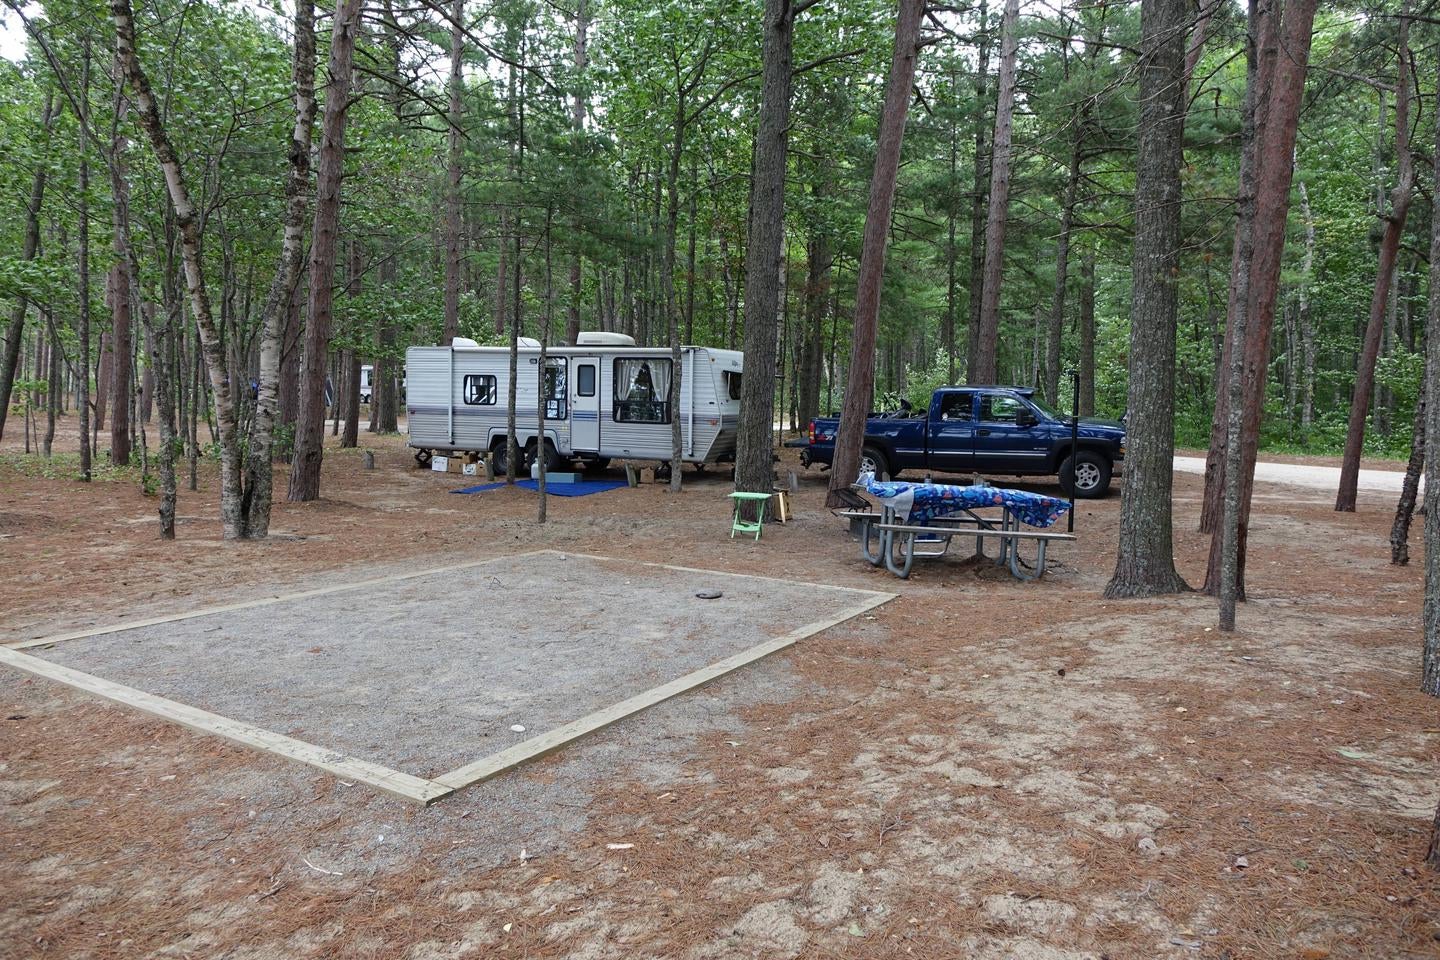 Site at campground with room for RV parking and tent space



Site ate Twelvemile

Credit: NPS